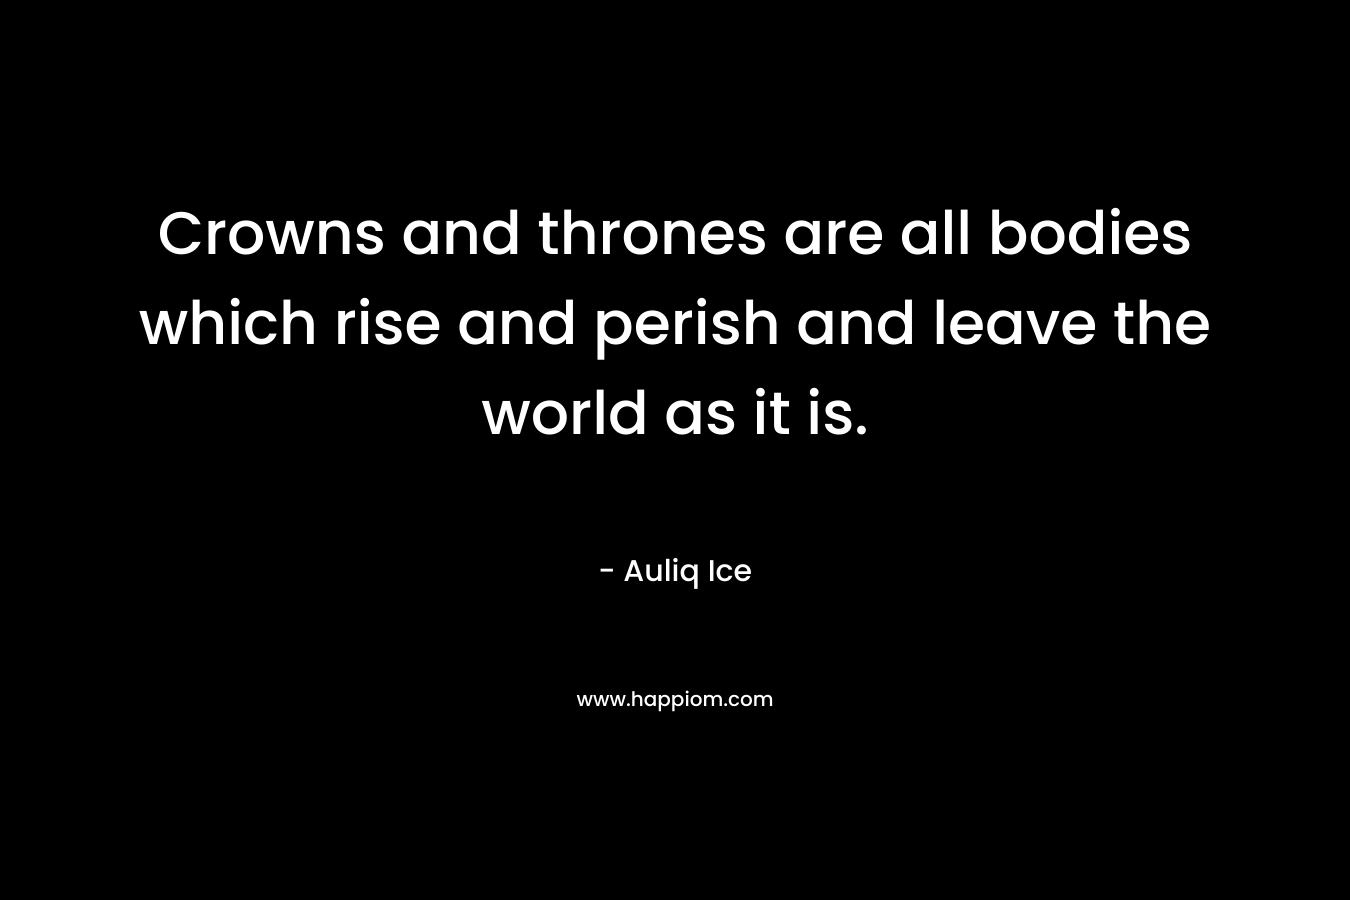 Crowns and thrones are all bodies which rise and perish and leave the world as it is. – Auliq Ice